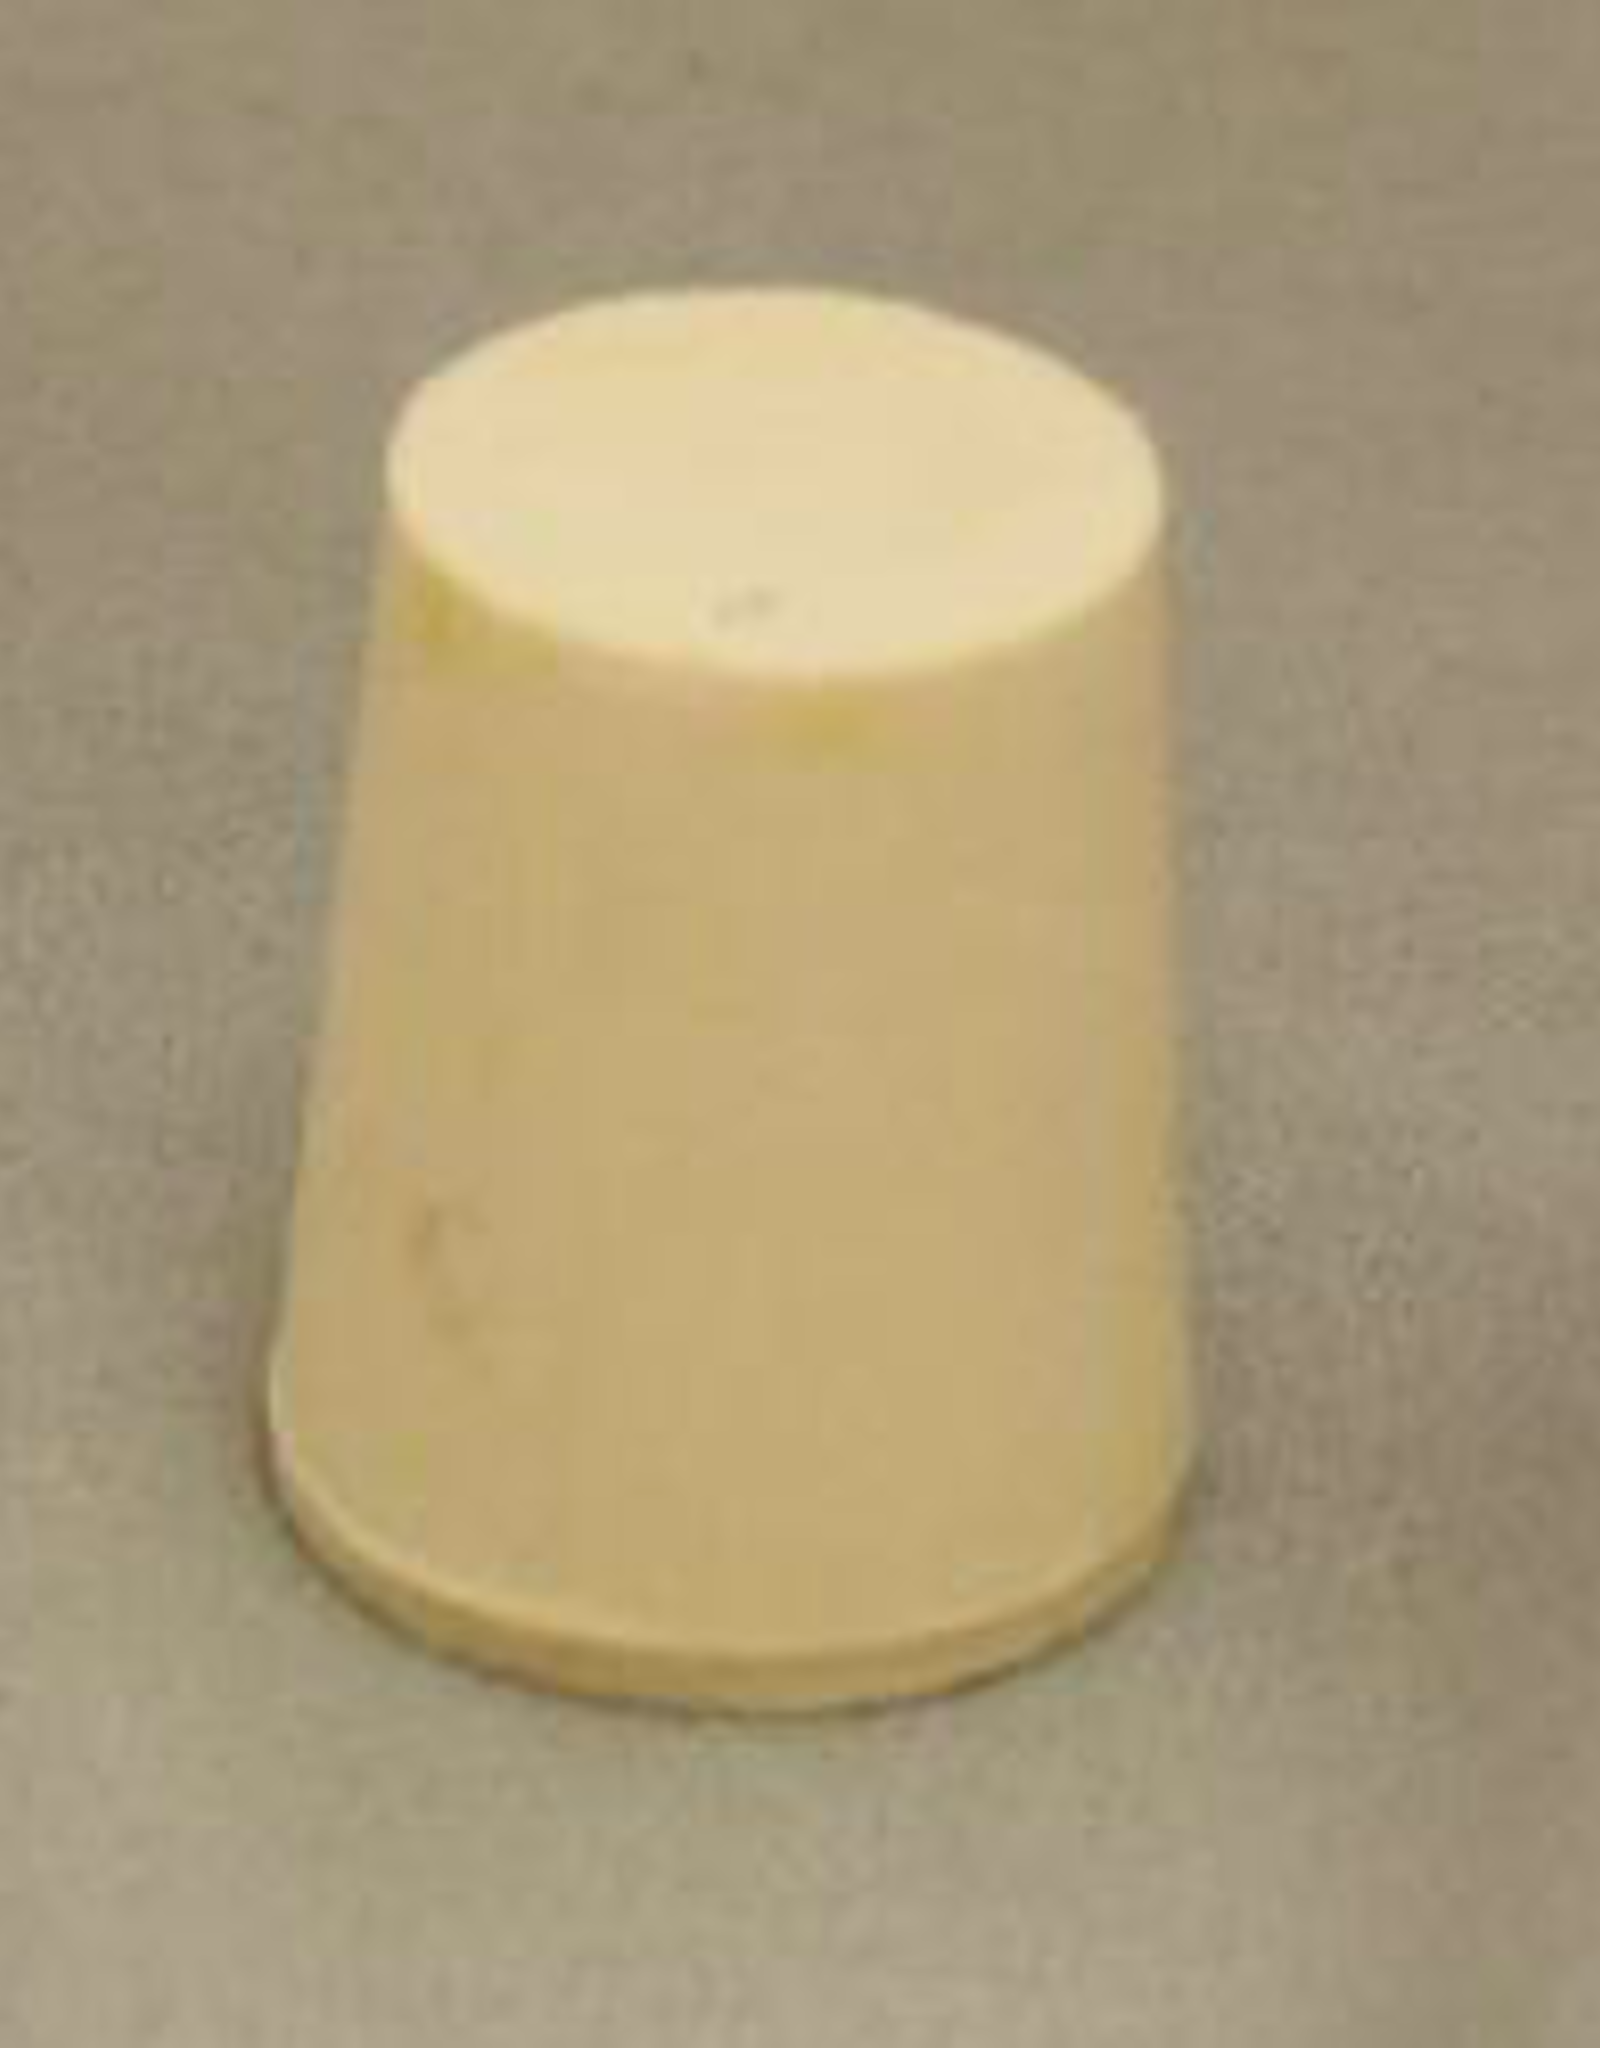 #2 SOLID RUBBER STOPPER